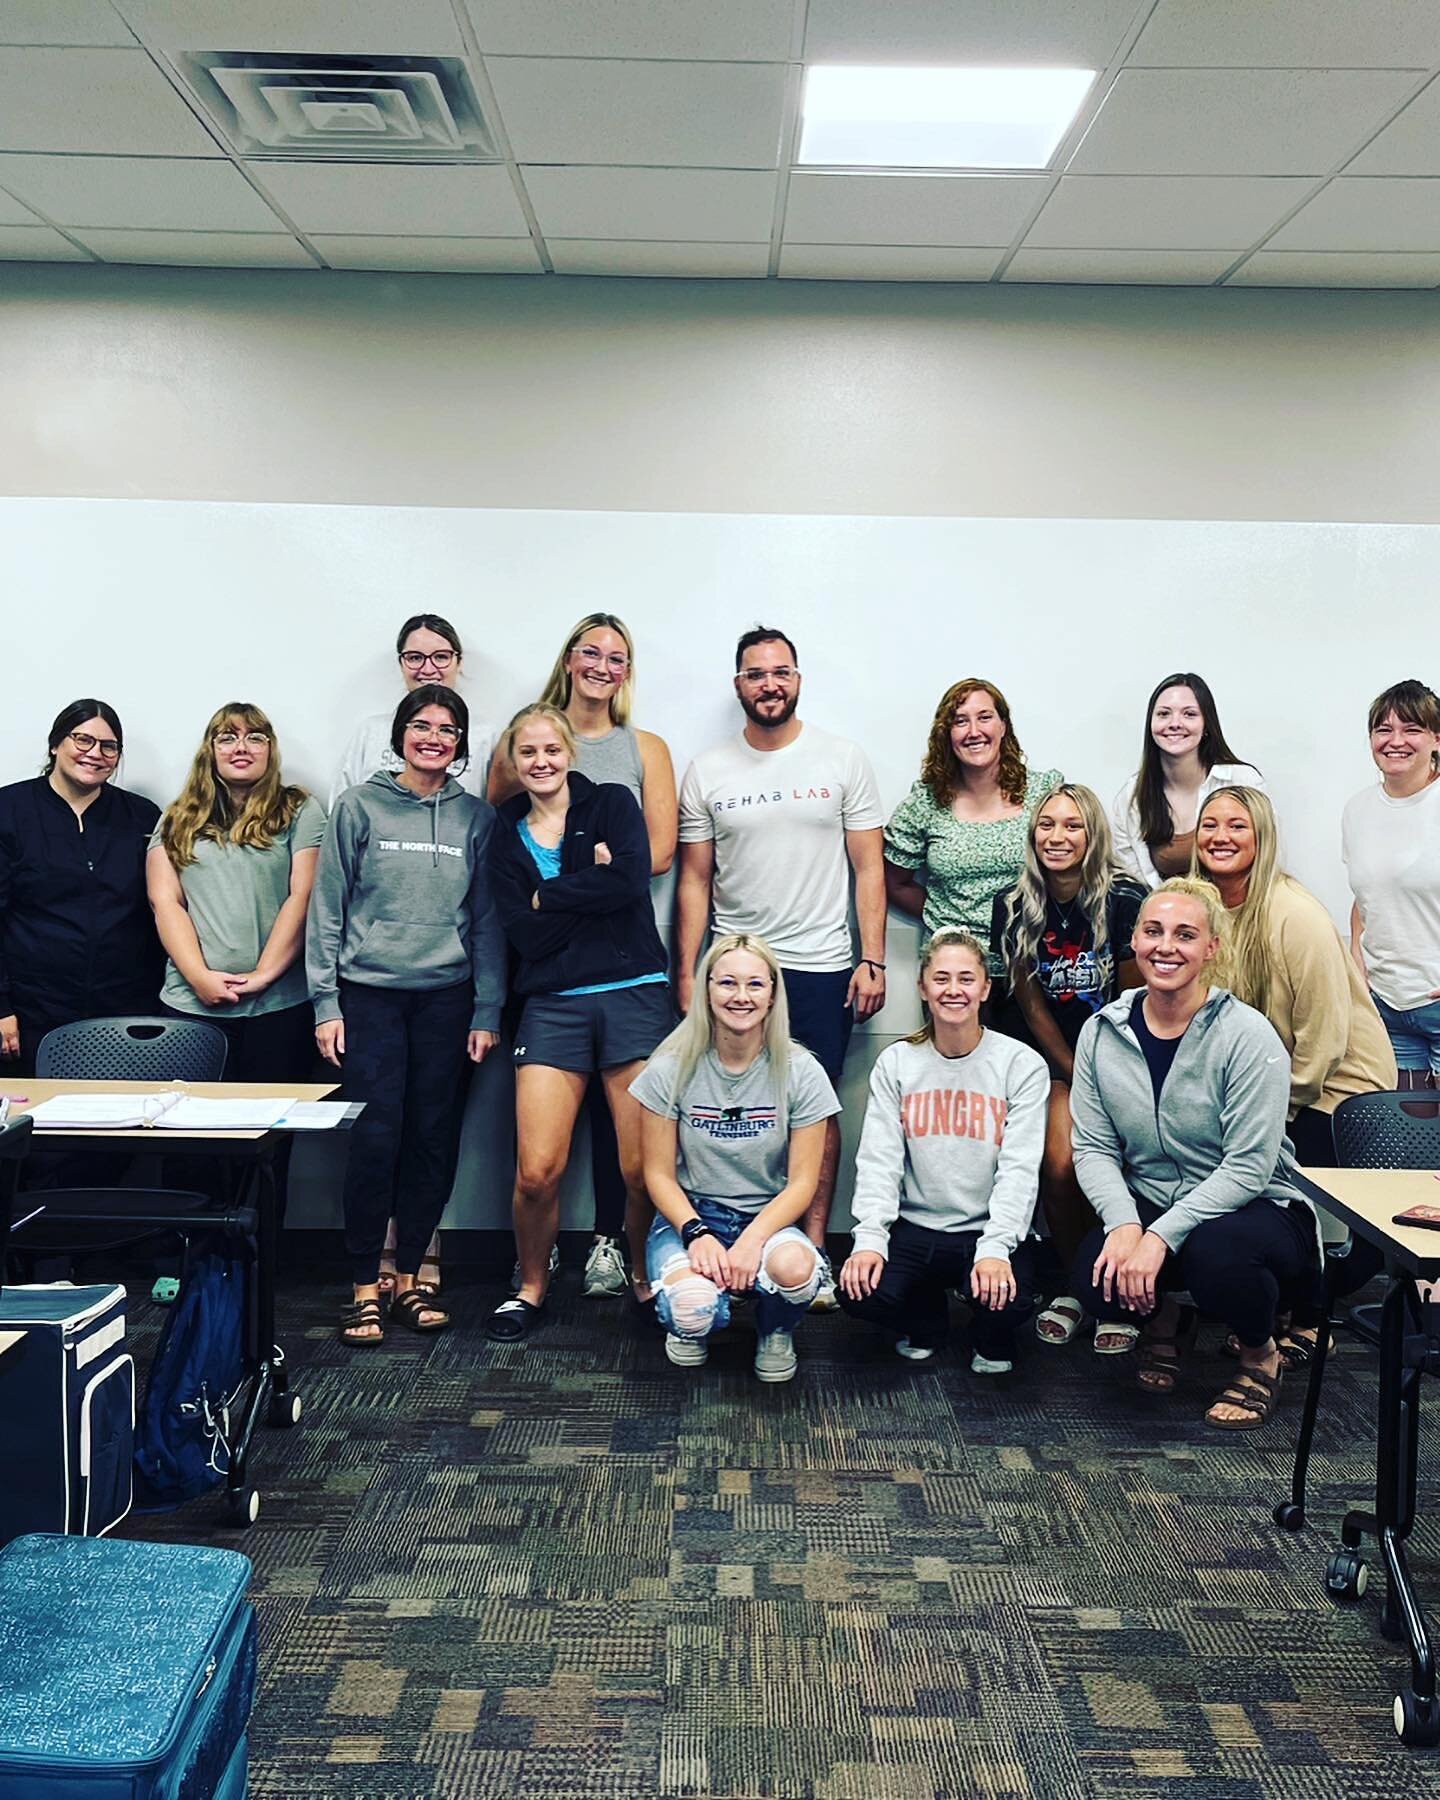 Dr. Sam was over @foxvalleytech today putting on a movement workshop for the Dental Hygienist program about the importance of posture ergonomics in their profession for career longevity! 

Teaching is an immense passion at Rehab Lab so if your busine